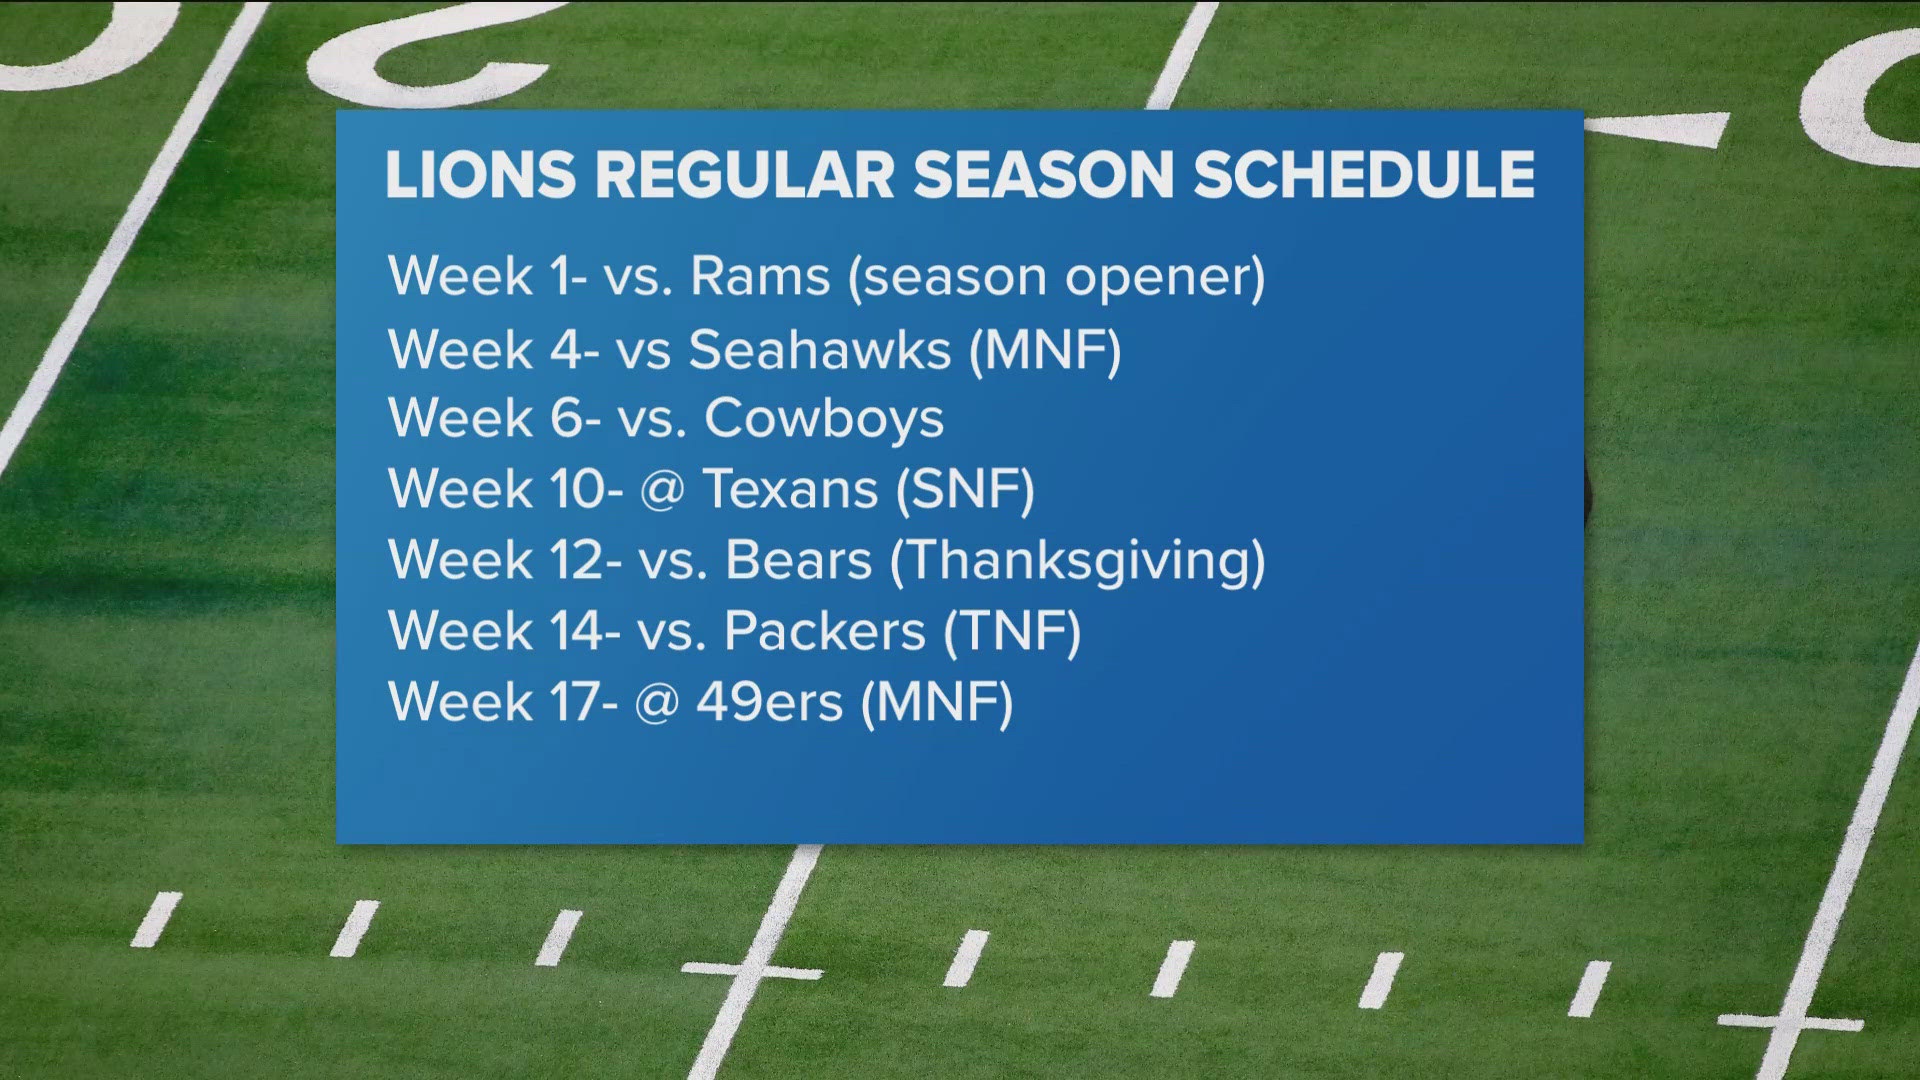 The Lions will be featured in at least five primetime matchups, not including their annual Thanksgiving Day game. The Browns will see four primetime games.